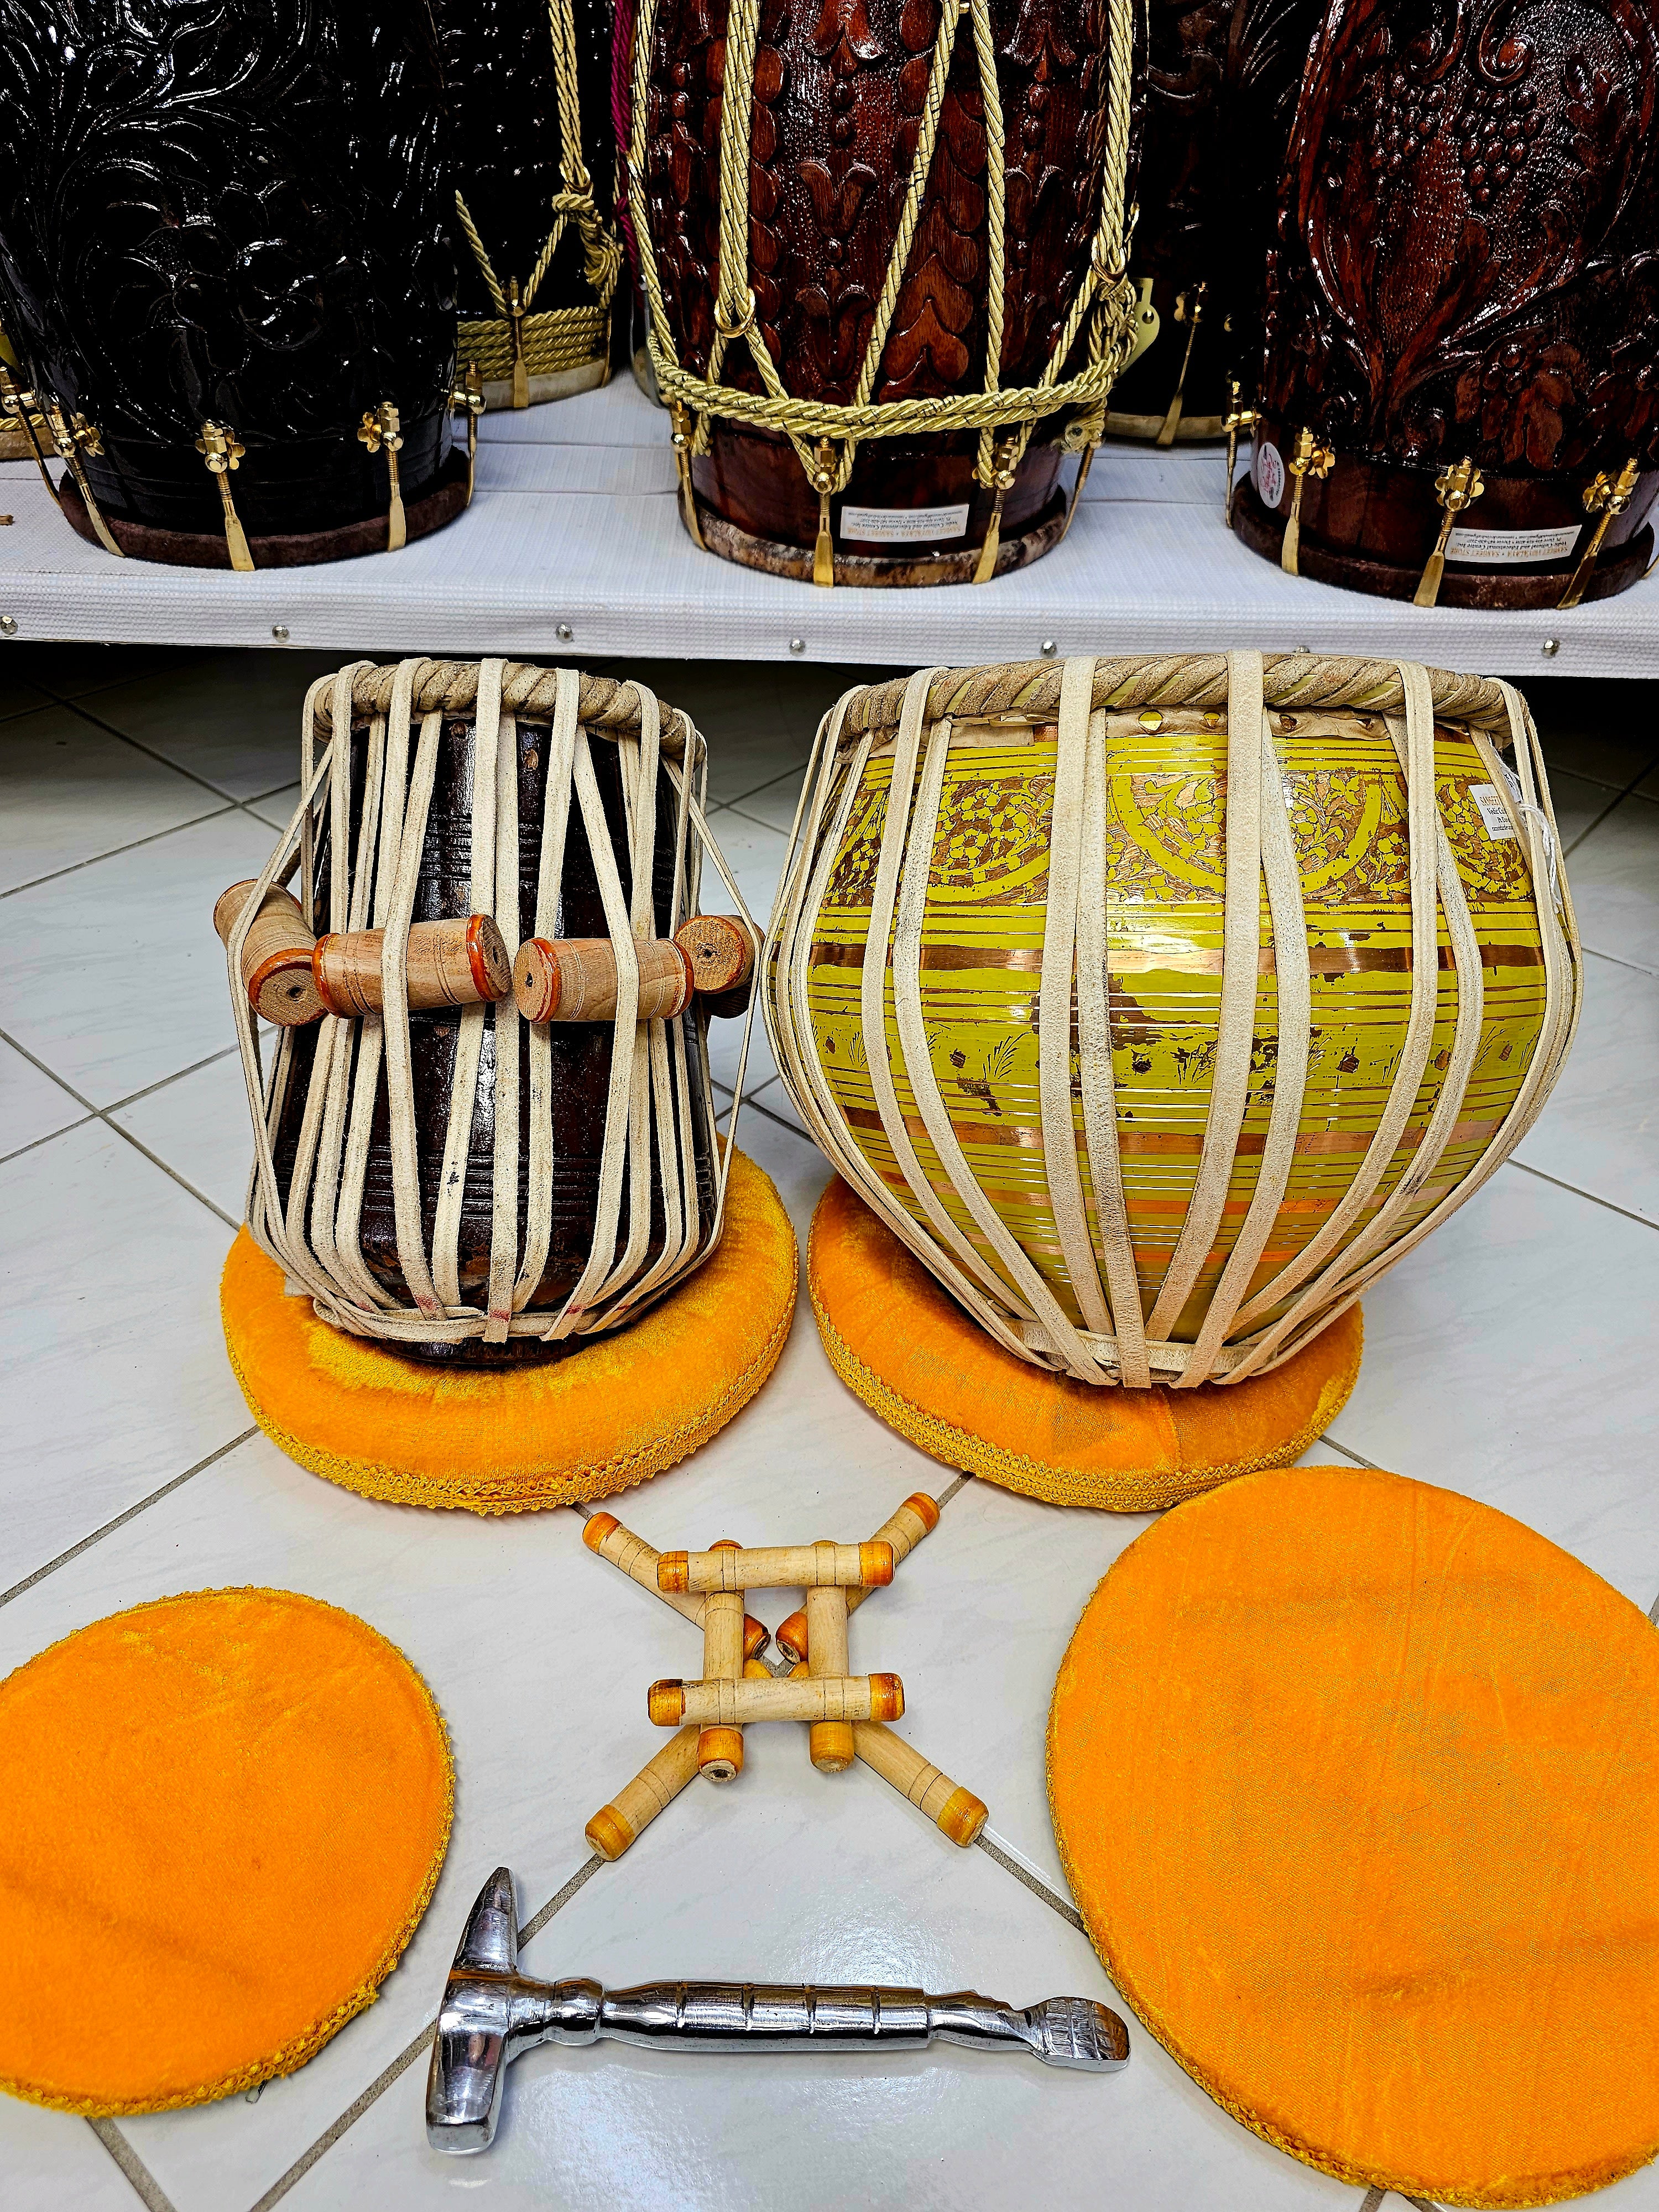 Iqbal Harmonic Echo Semi-Professional Tabla Set - 5" F Red Sheesham Dayan with Subtle Shell Imperfections and 9" Yellow & Gold Copper Bayan